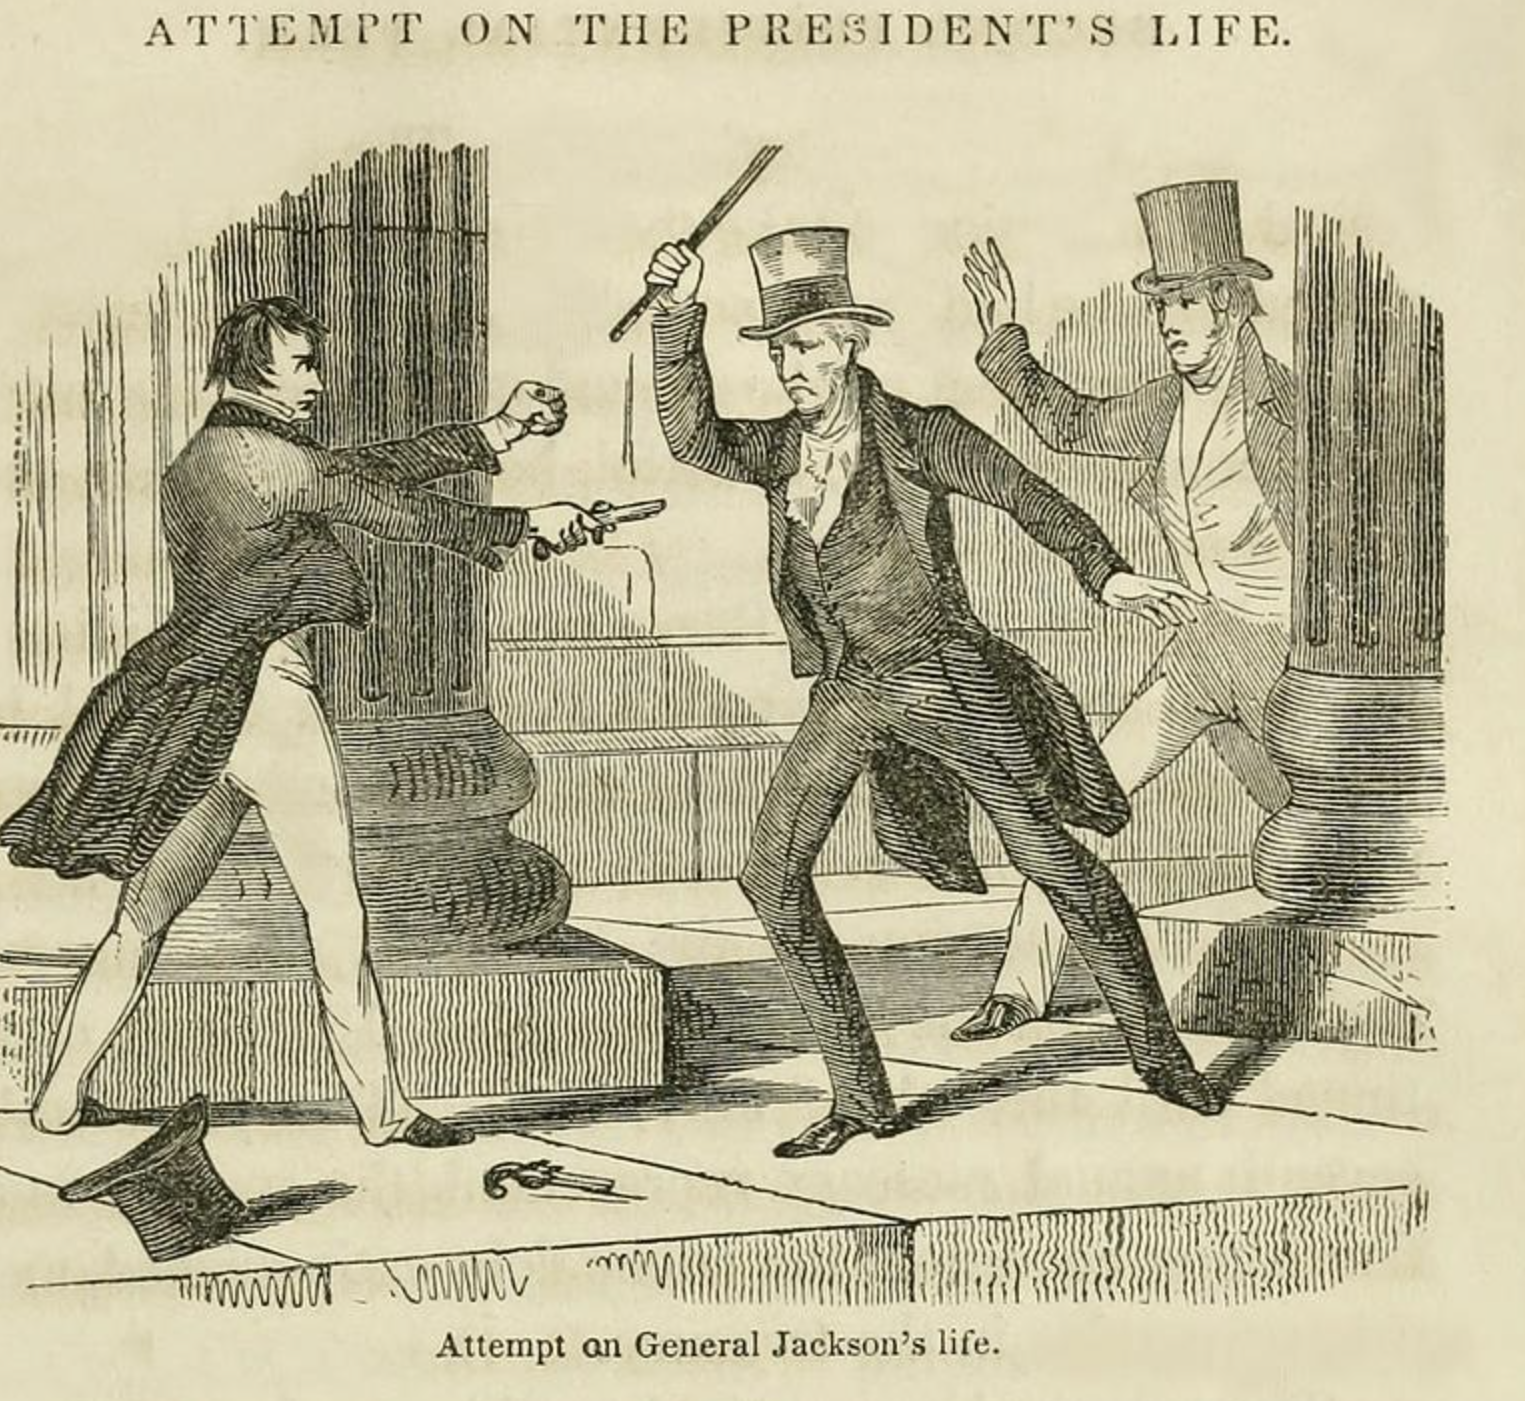 andrew jackson assassination attempt - Attempt On The President'S Life. Attempt an General Jackson's life..